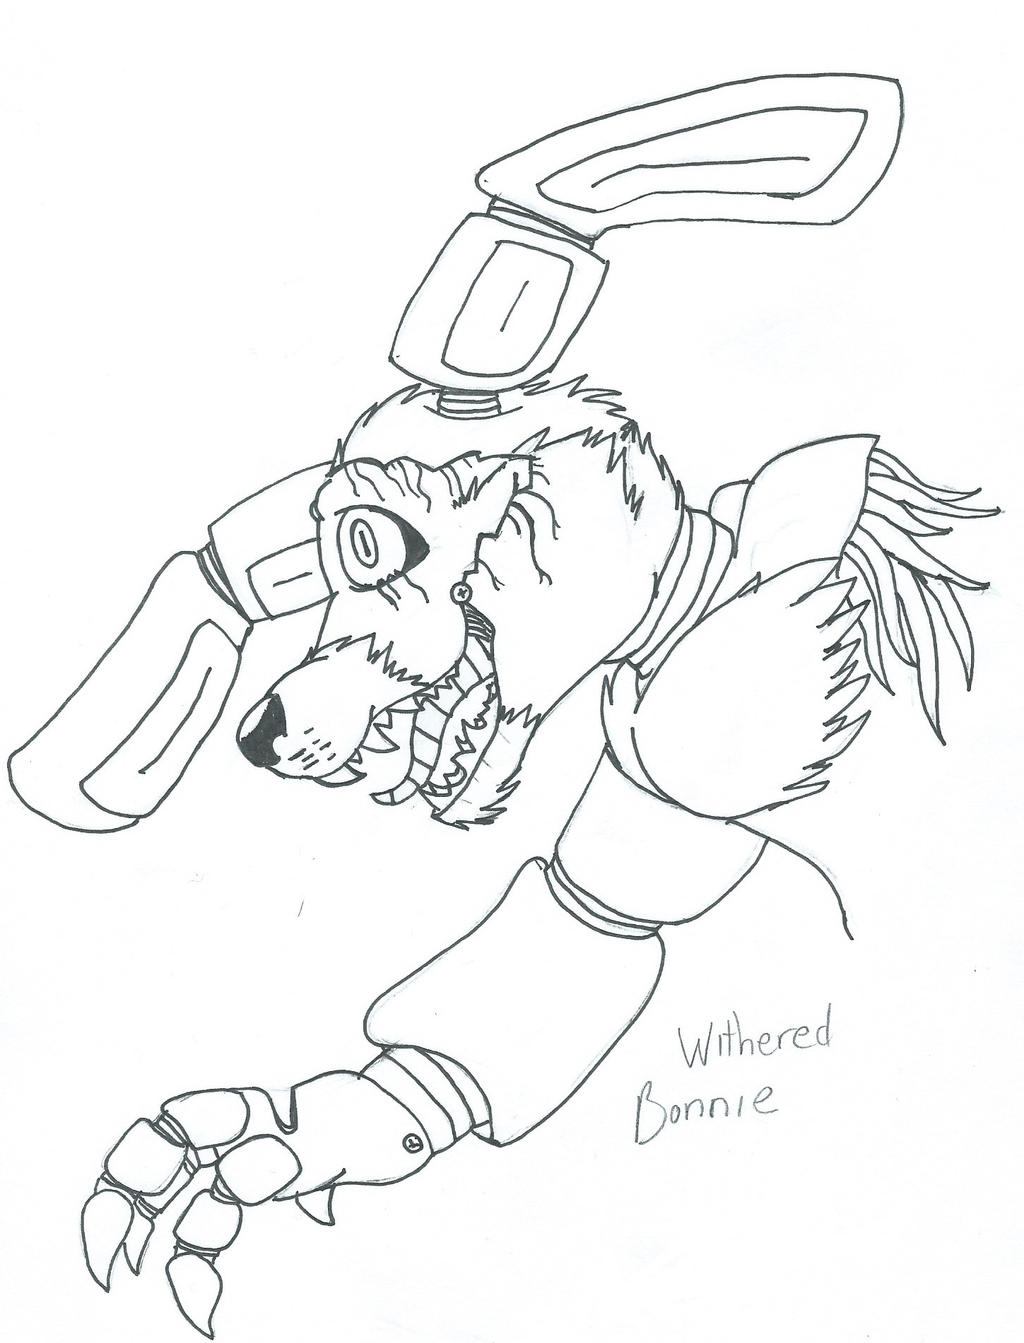 Withered Naf Sketch Coloring Page.